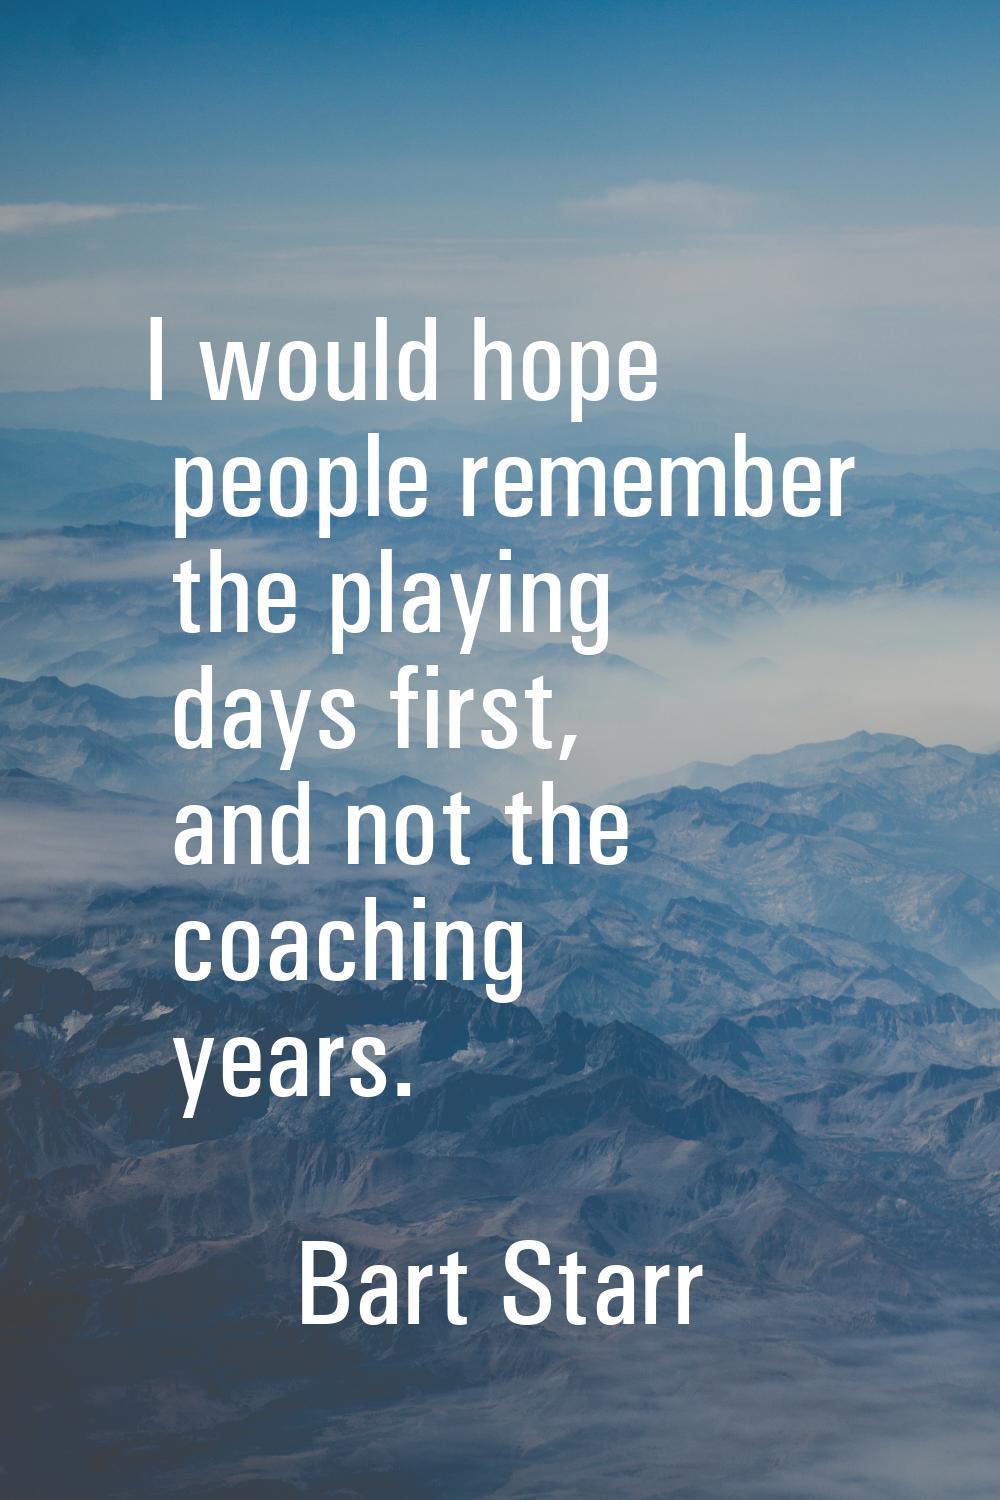 I would hope people remember the playing days first, and not the coaching years.